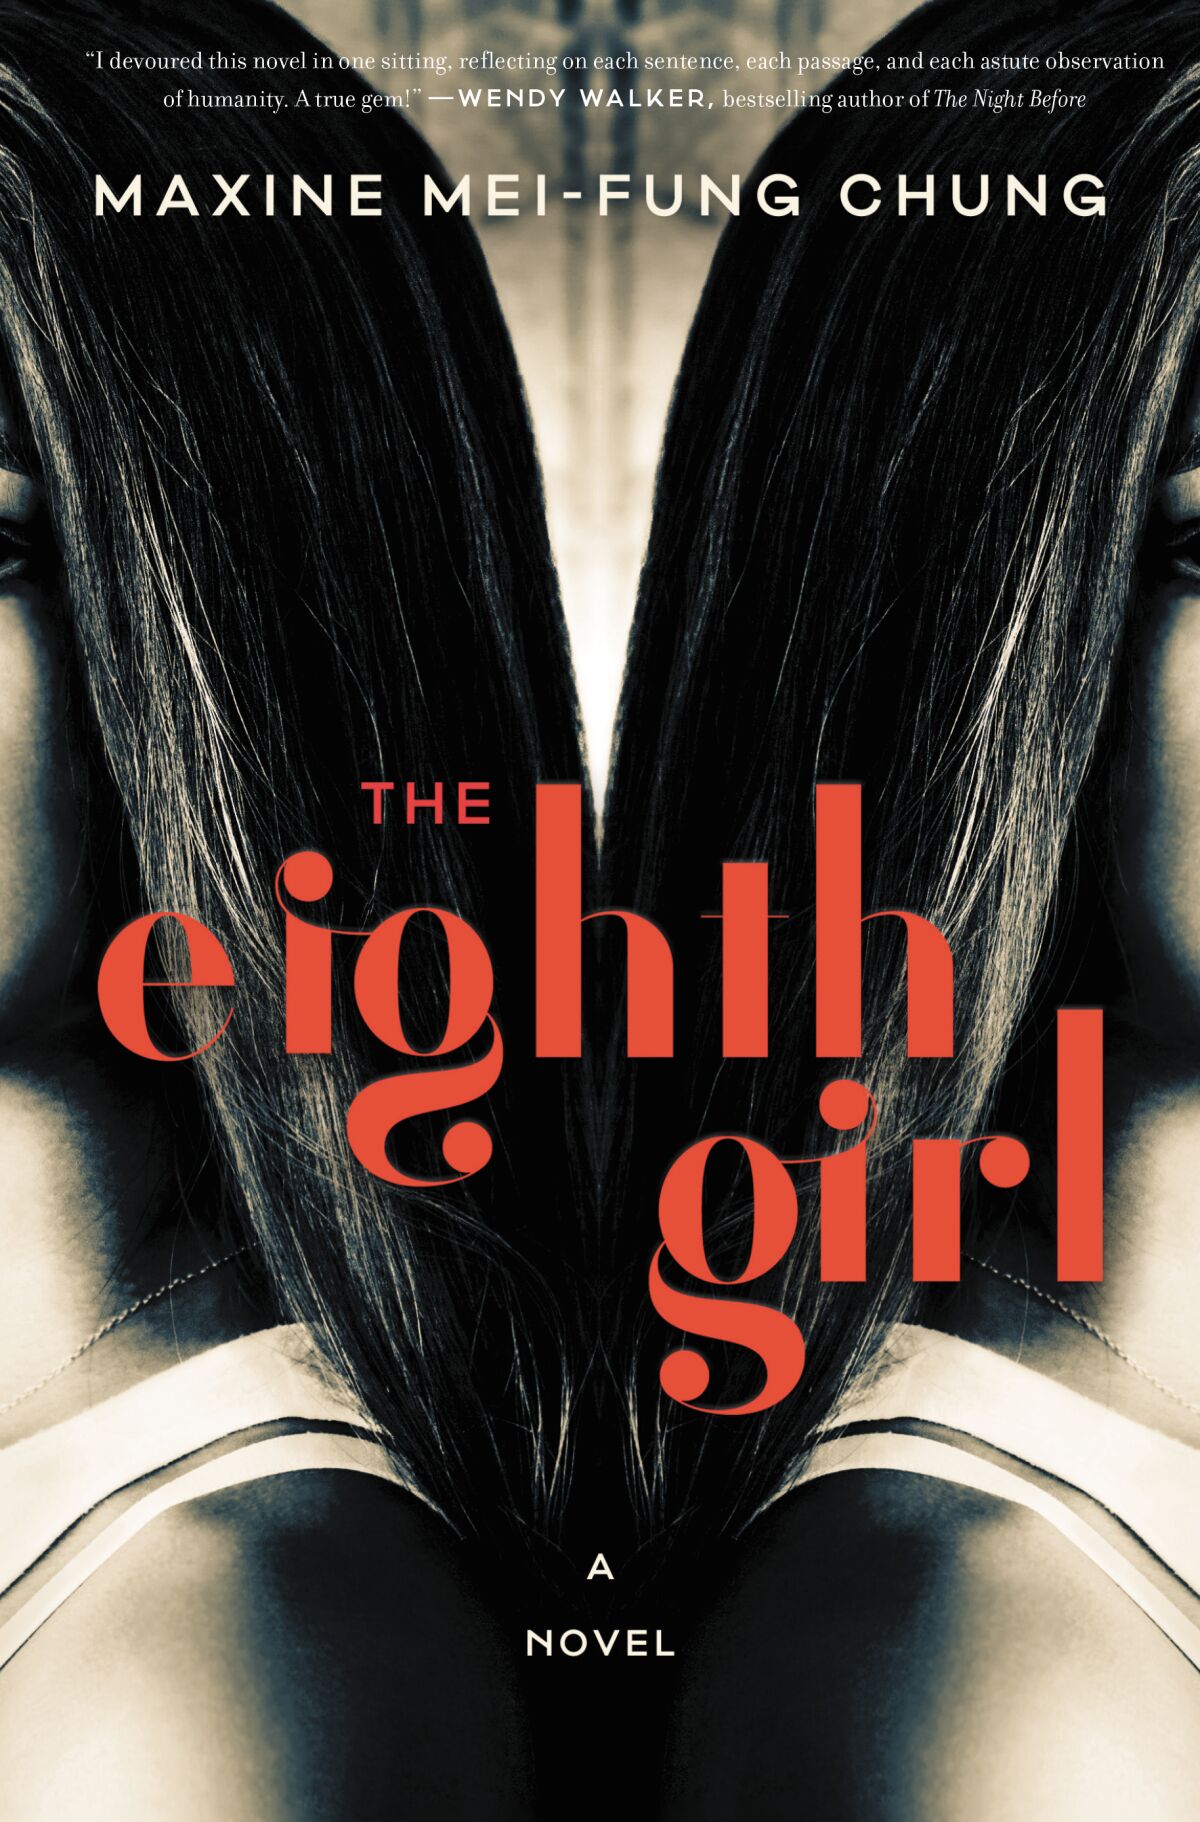 A book jacket for Maxine Mei-Fung Chung's book "The Eighth Girl." 